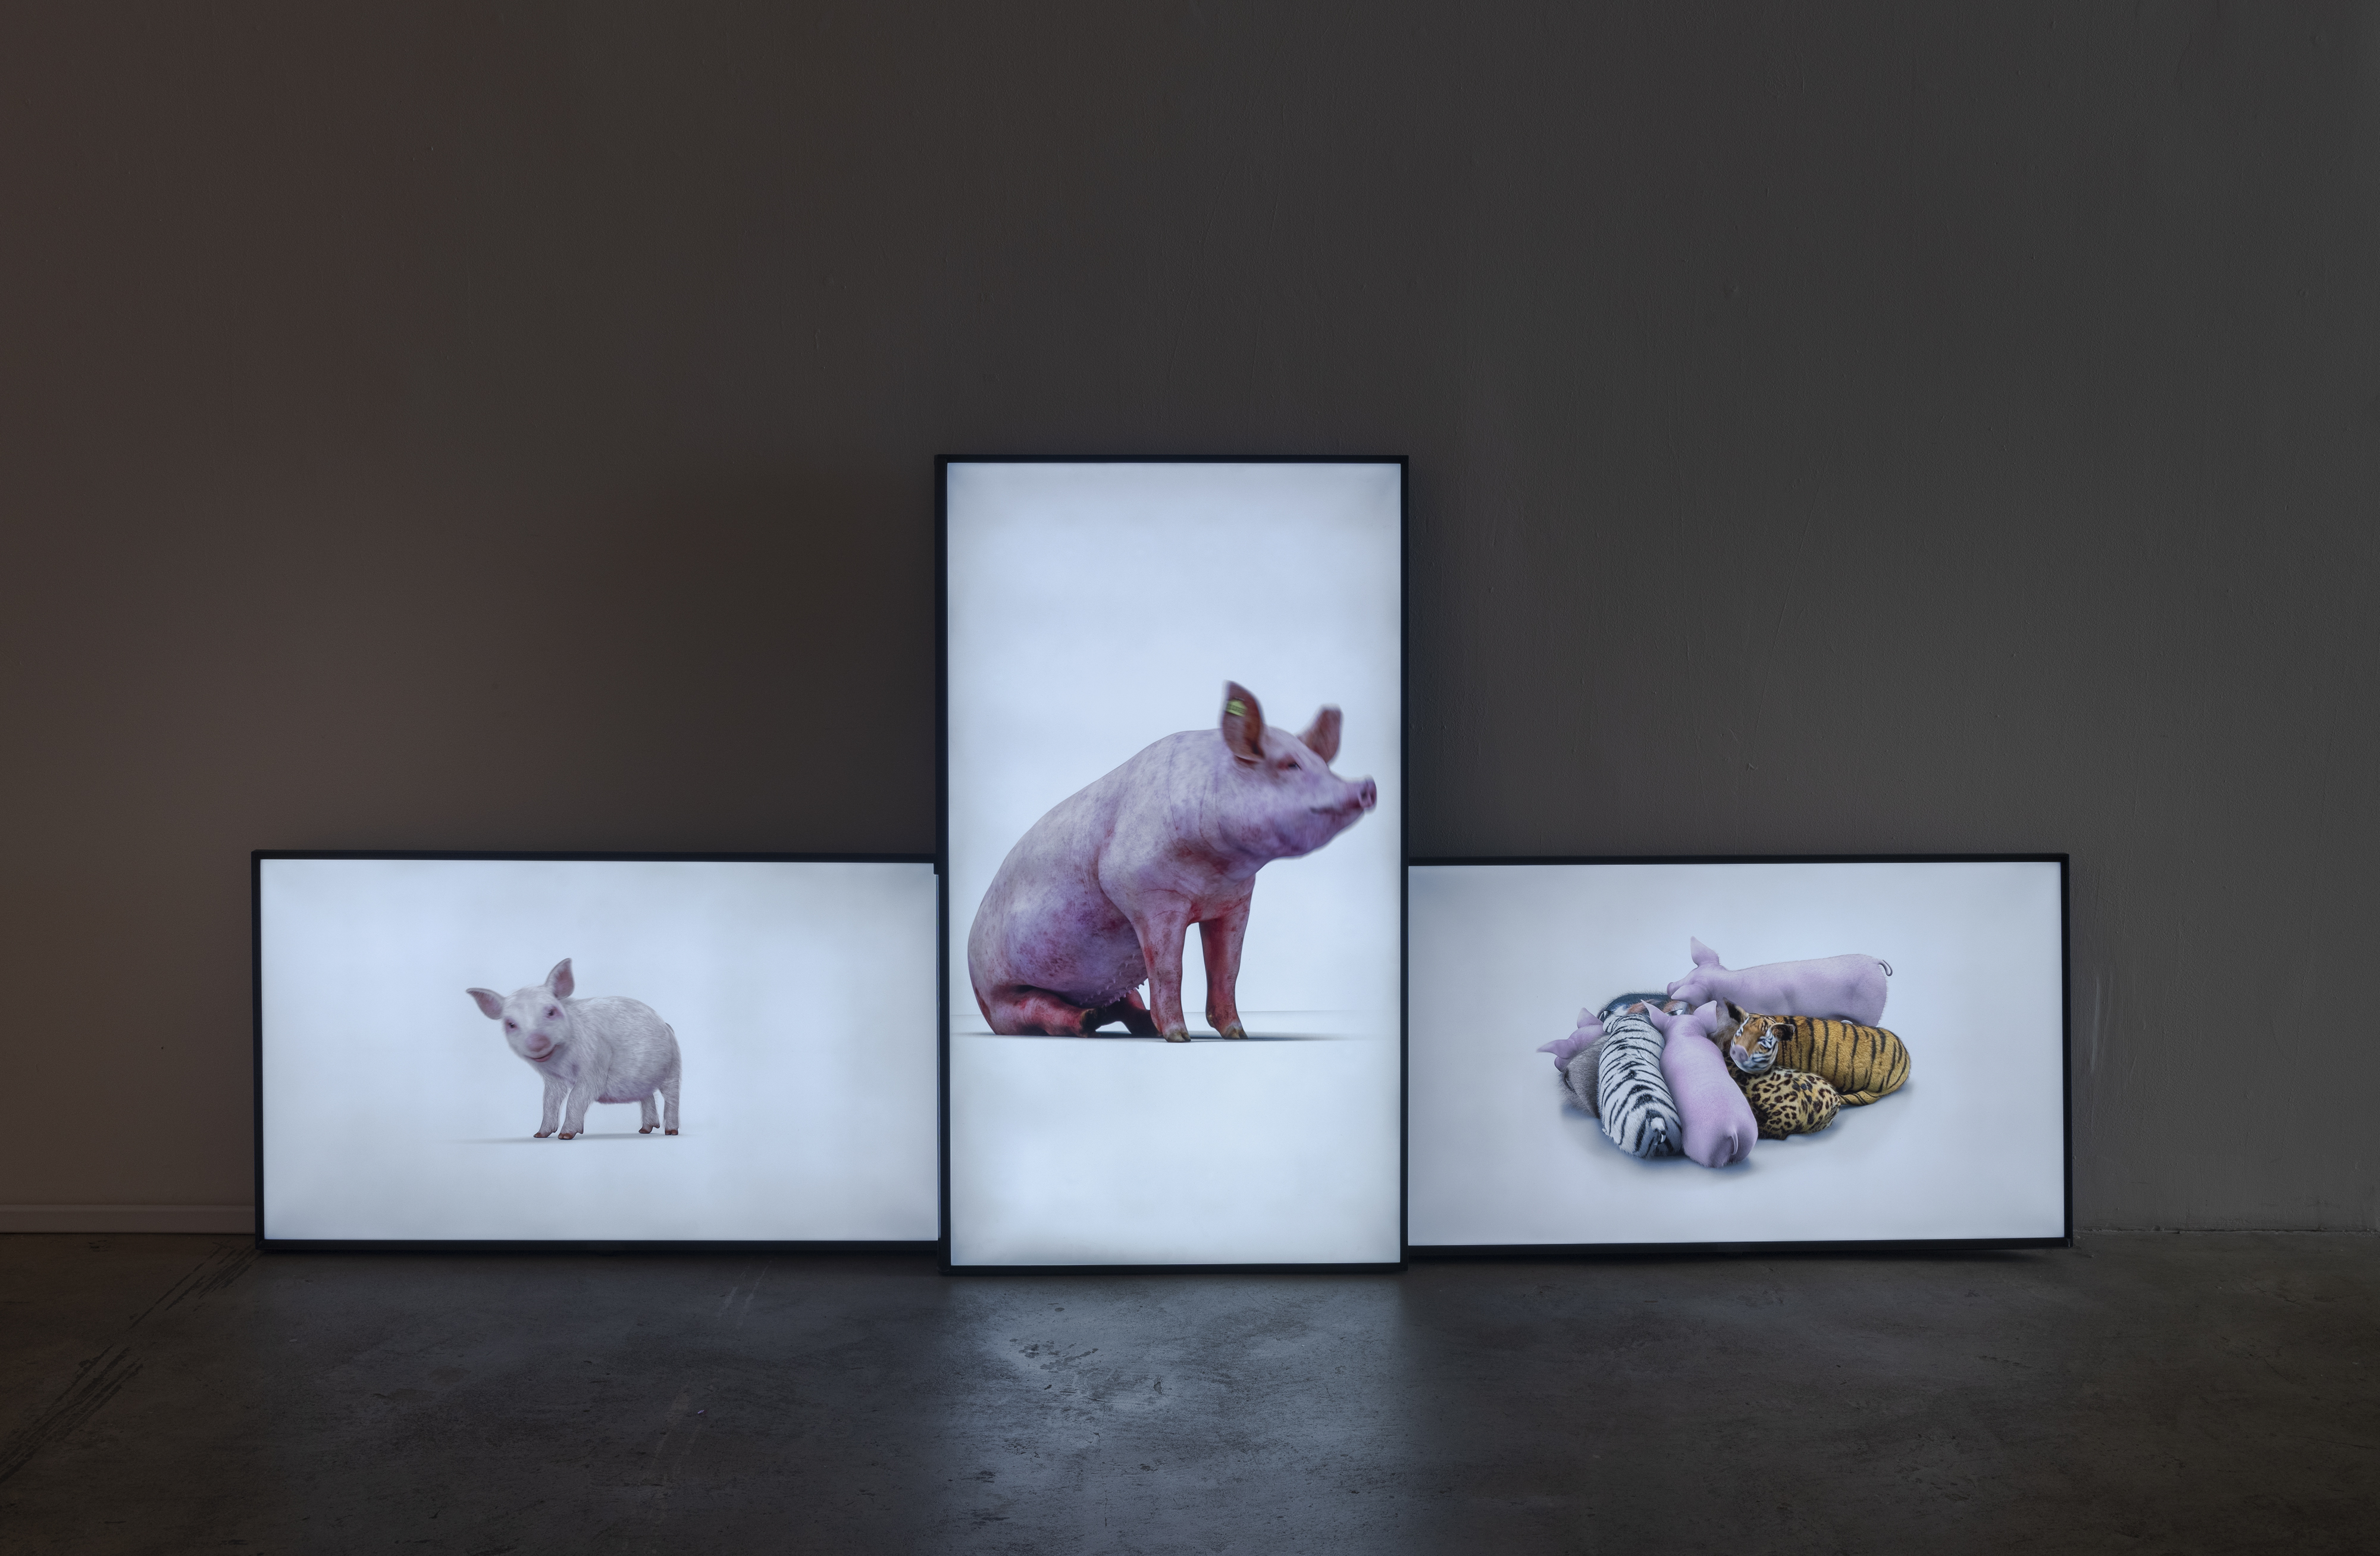 Three illuminated images of pigs stand in a line in a dark museum space.